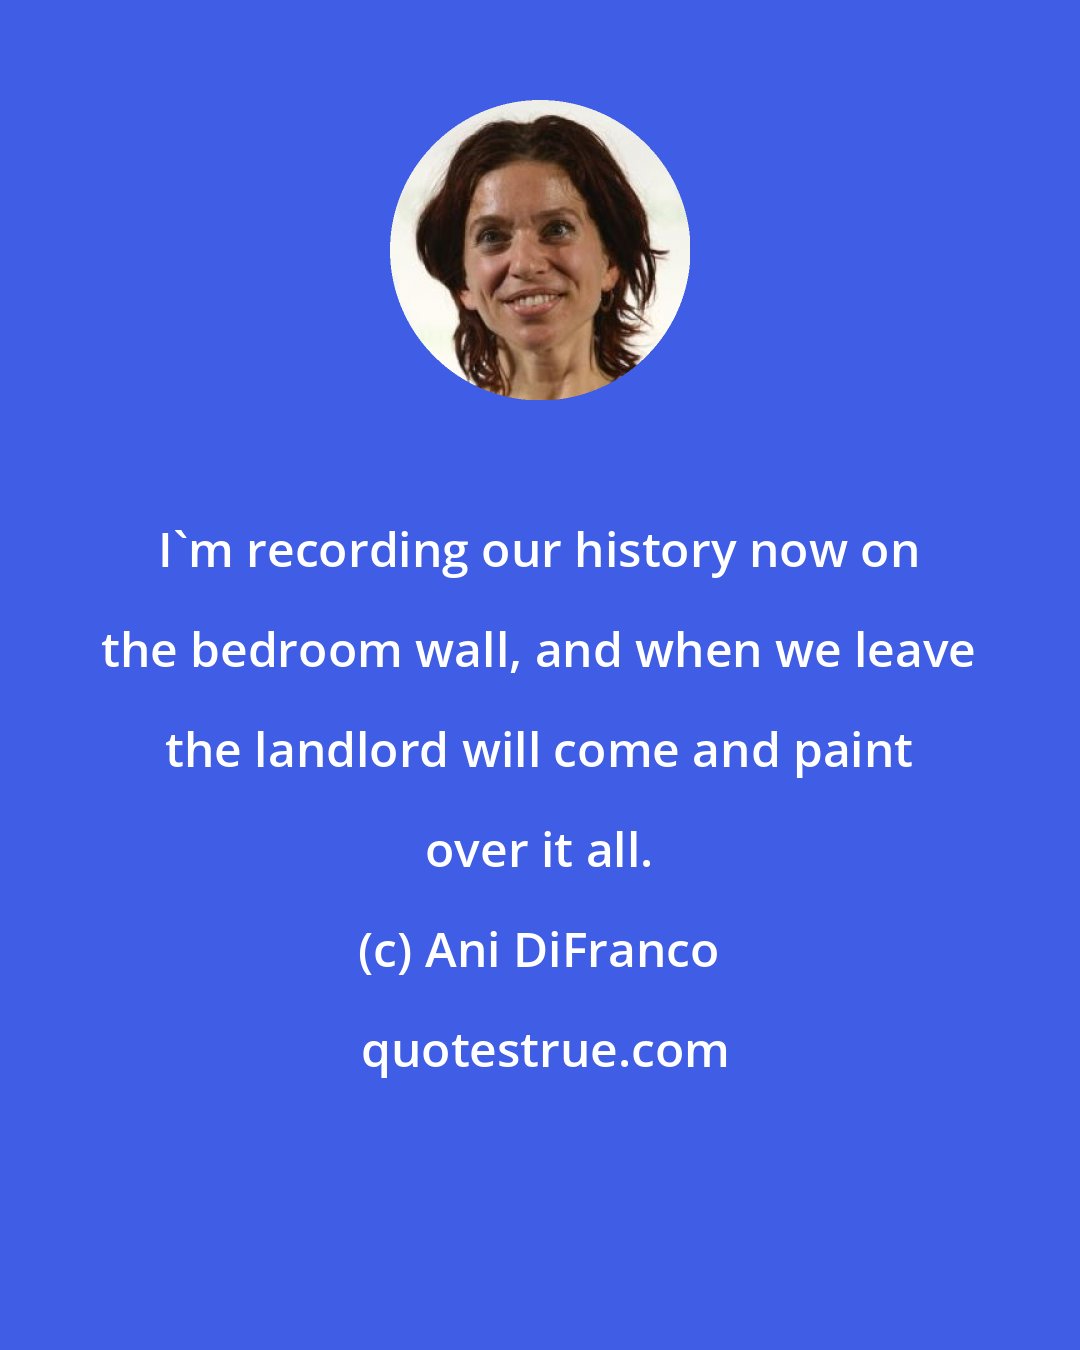 Ani DiFranco: I'm recording our history now on the bedroom wall, and when we leave the landlord will come and paint over it all.